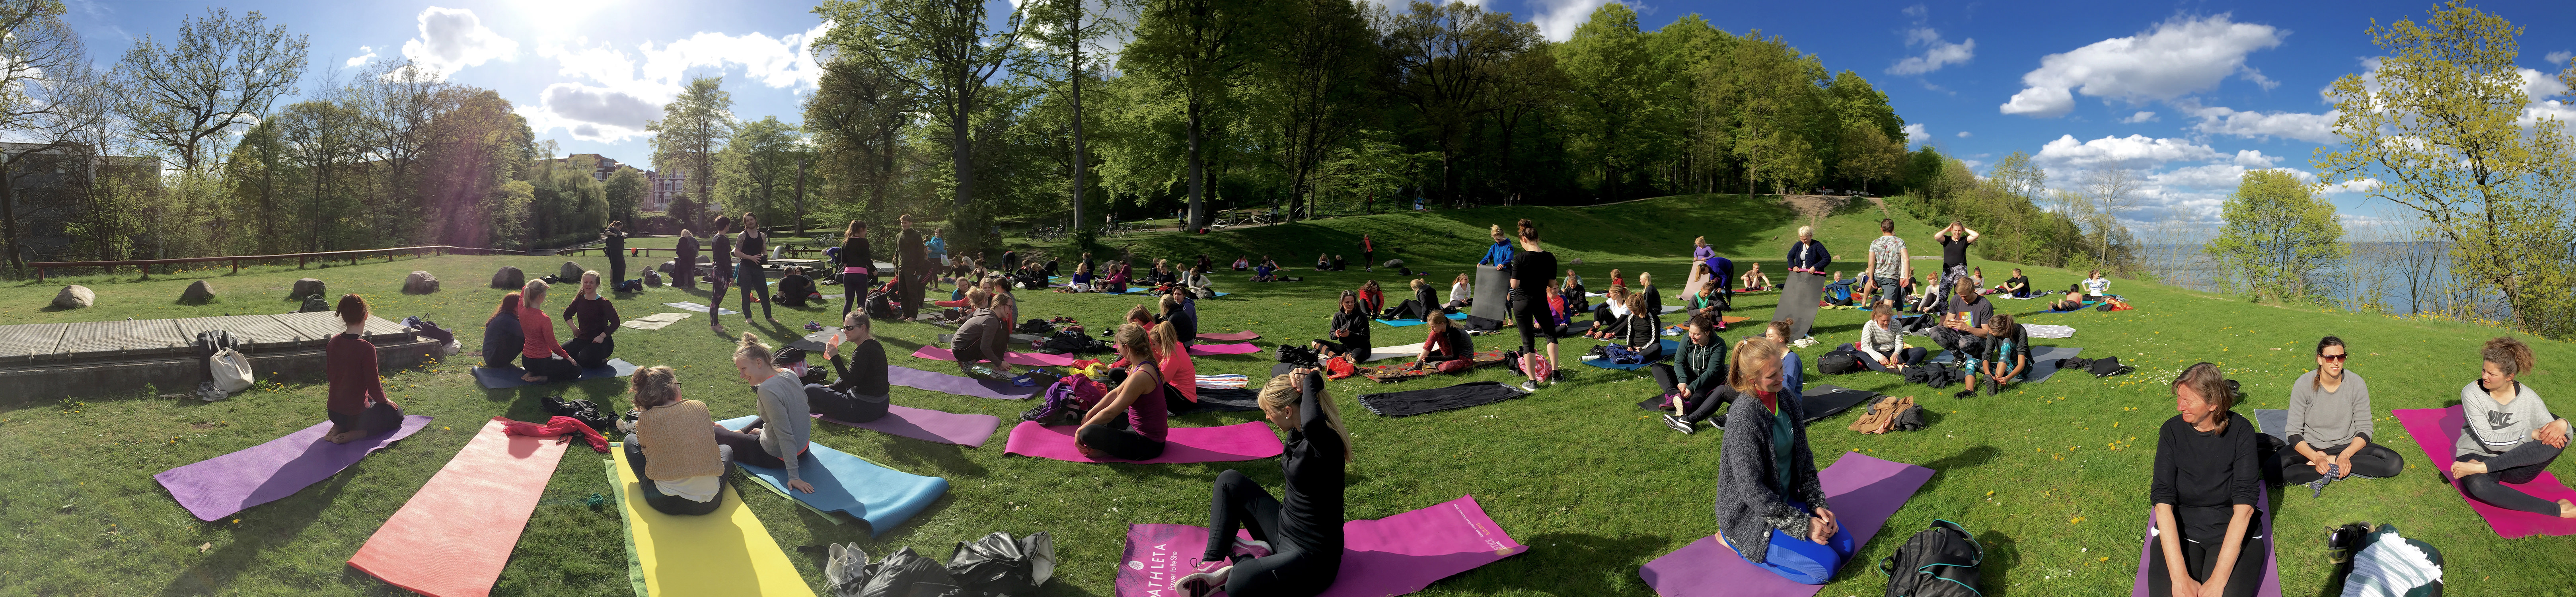 As the sunny days of summer approaches, I attended the first outdoor yoga session at the local park. We had a blast!